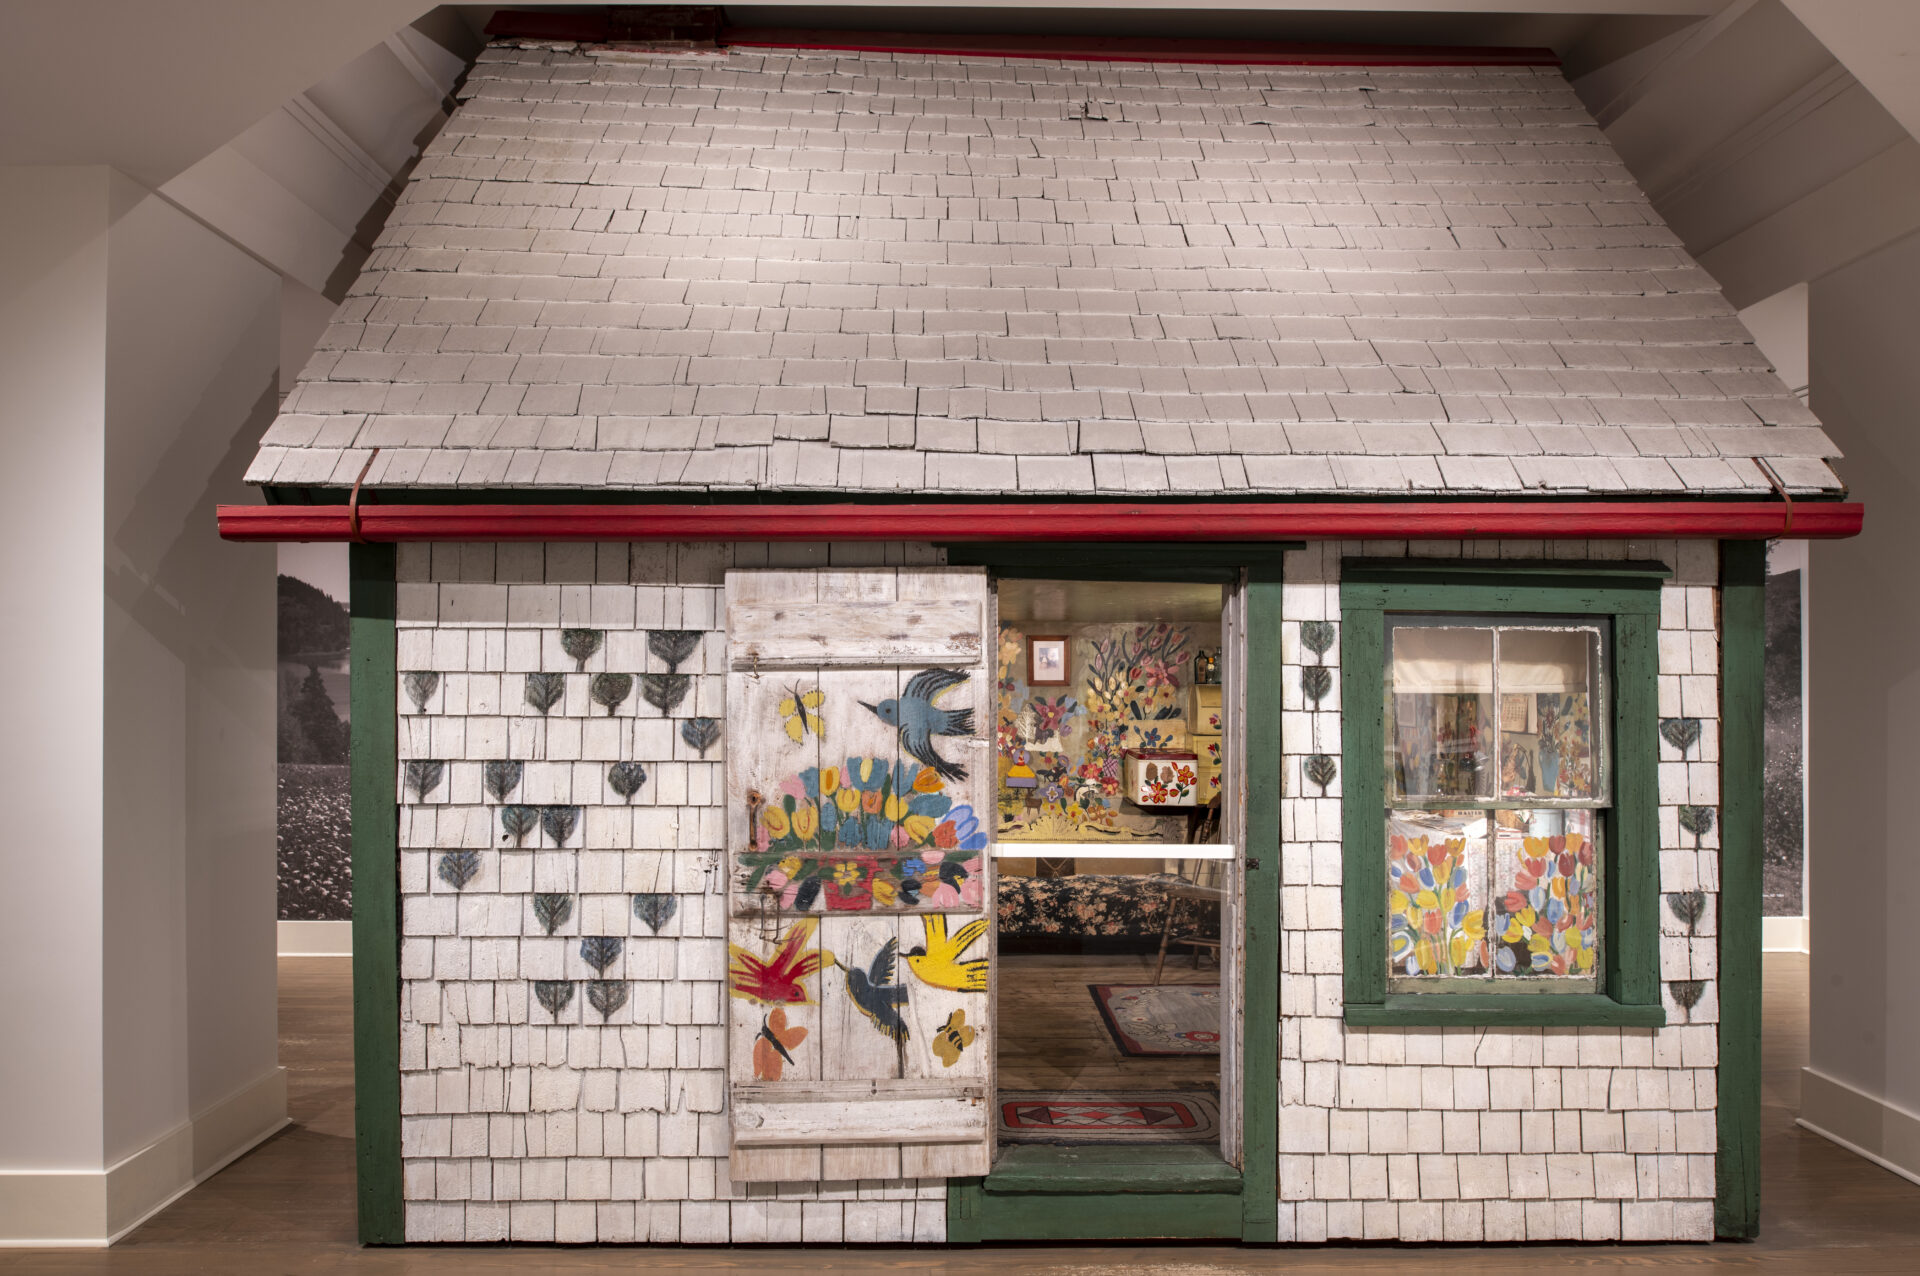 The Maud Lewis House